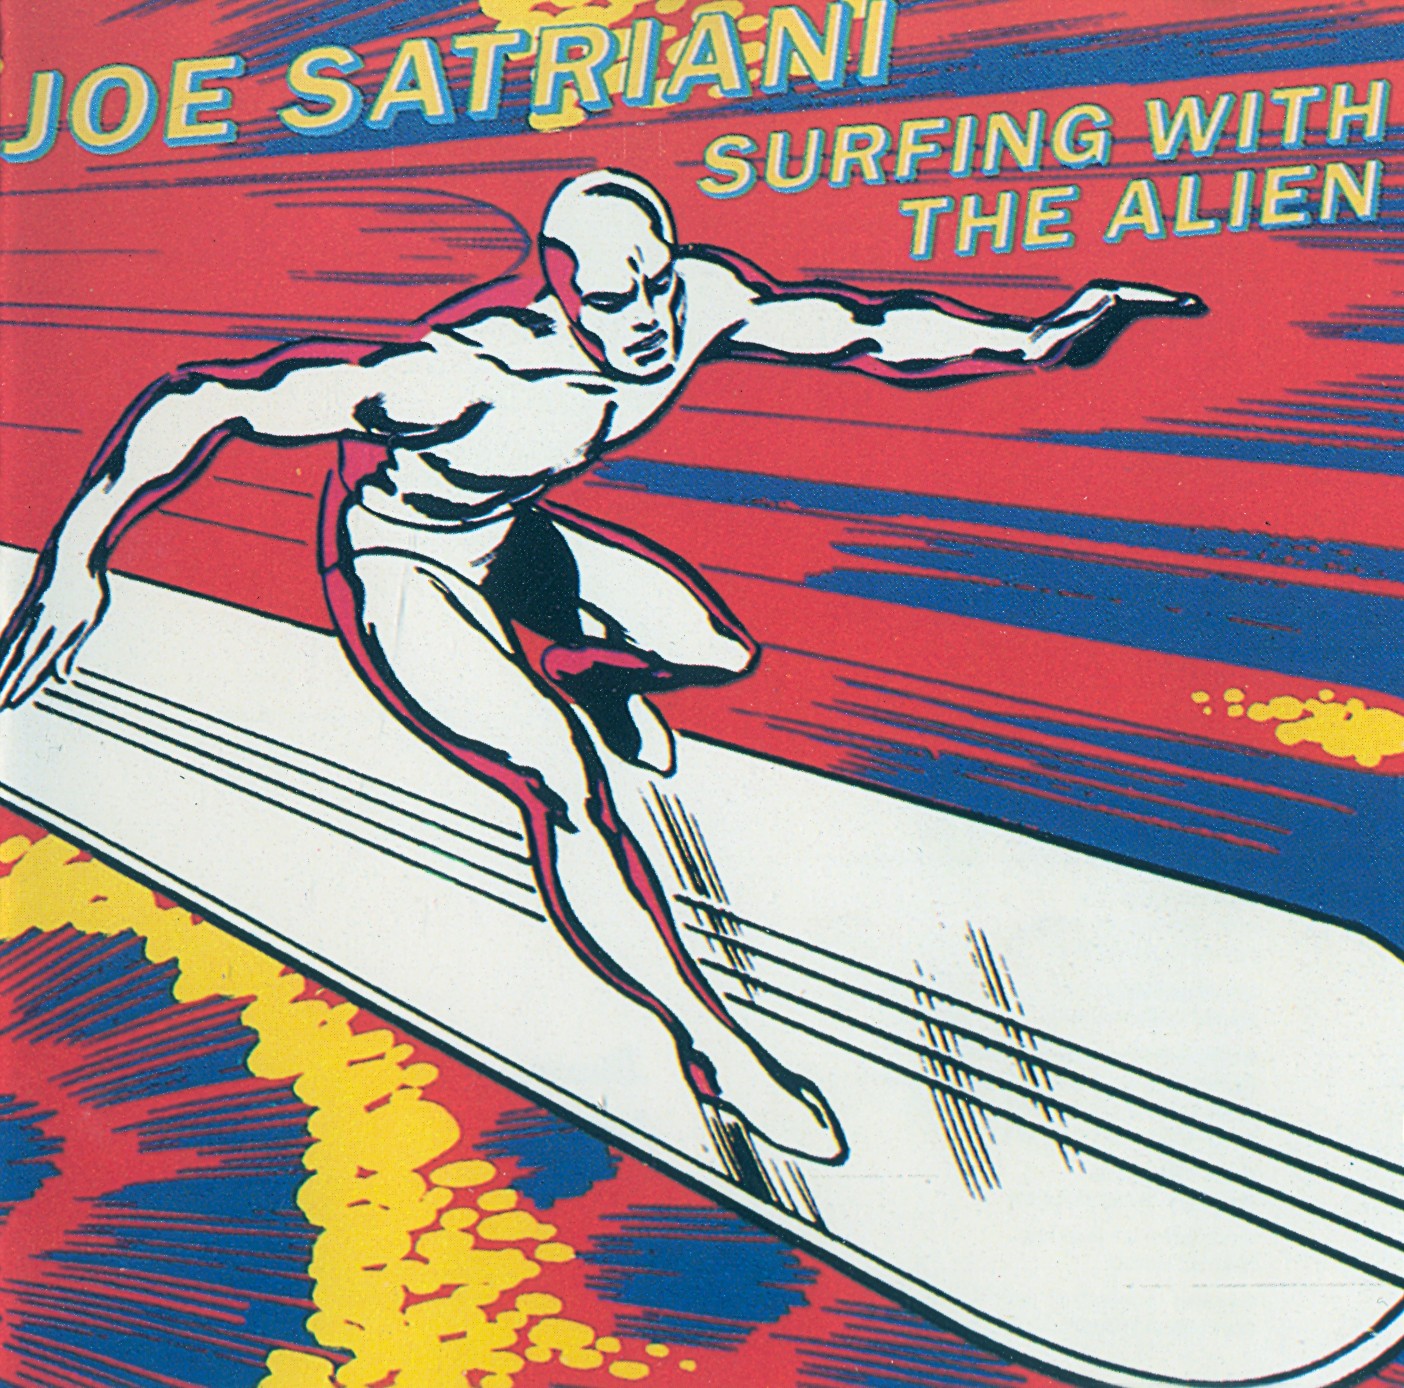 [[AllCDCovers]_joe_satriani_surfing_with_the_alien_1999_retail_cd-front.jpg]